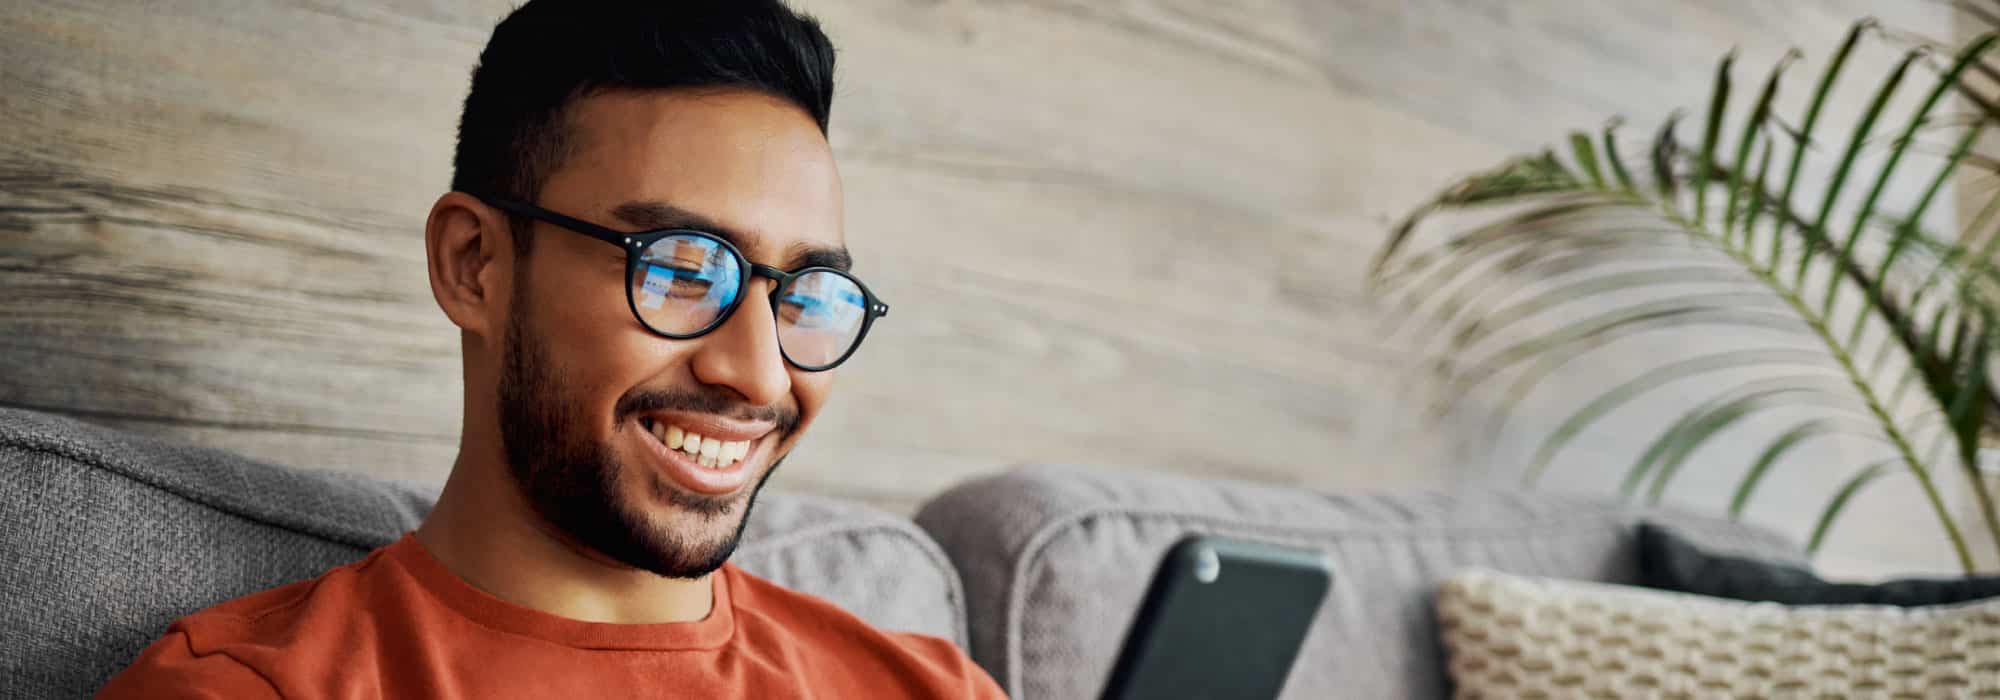 A man looking at his cell phone while sitting on the couch. He is smiling and wearing glasses.